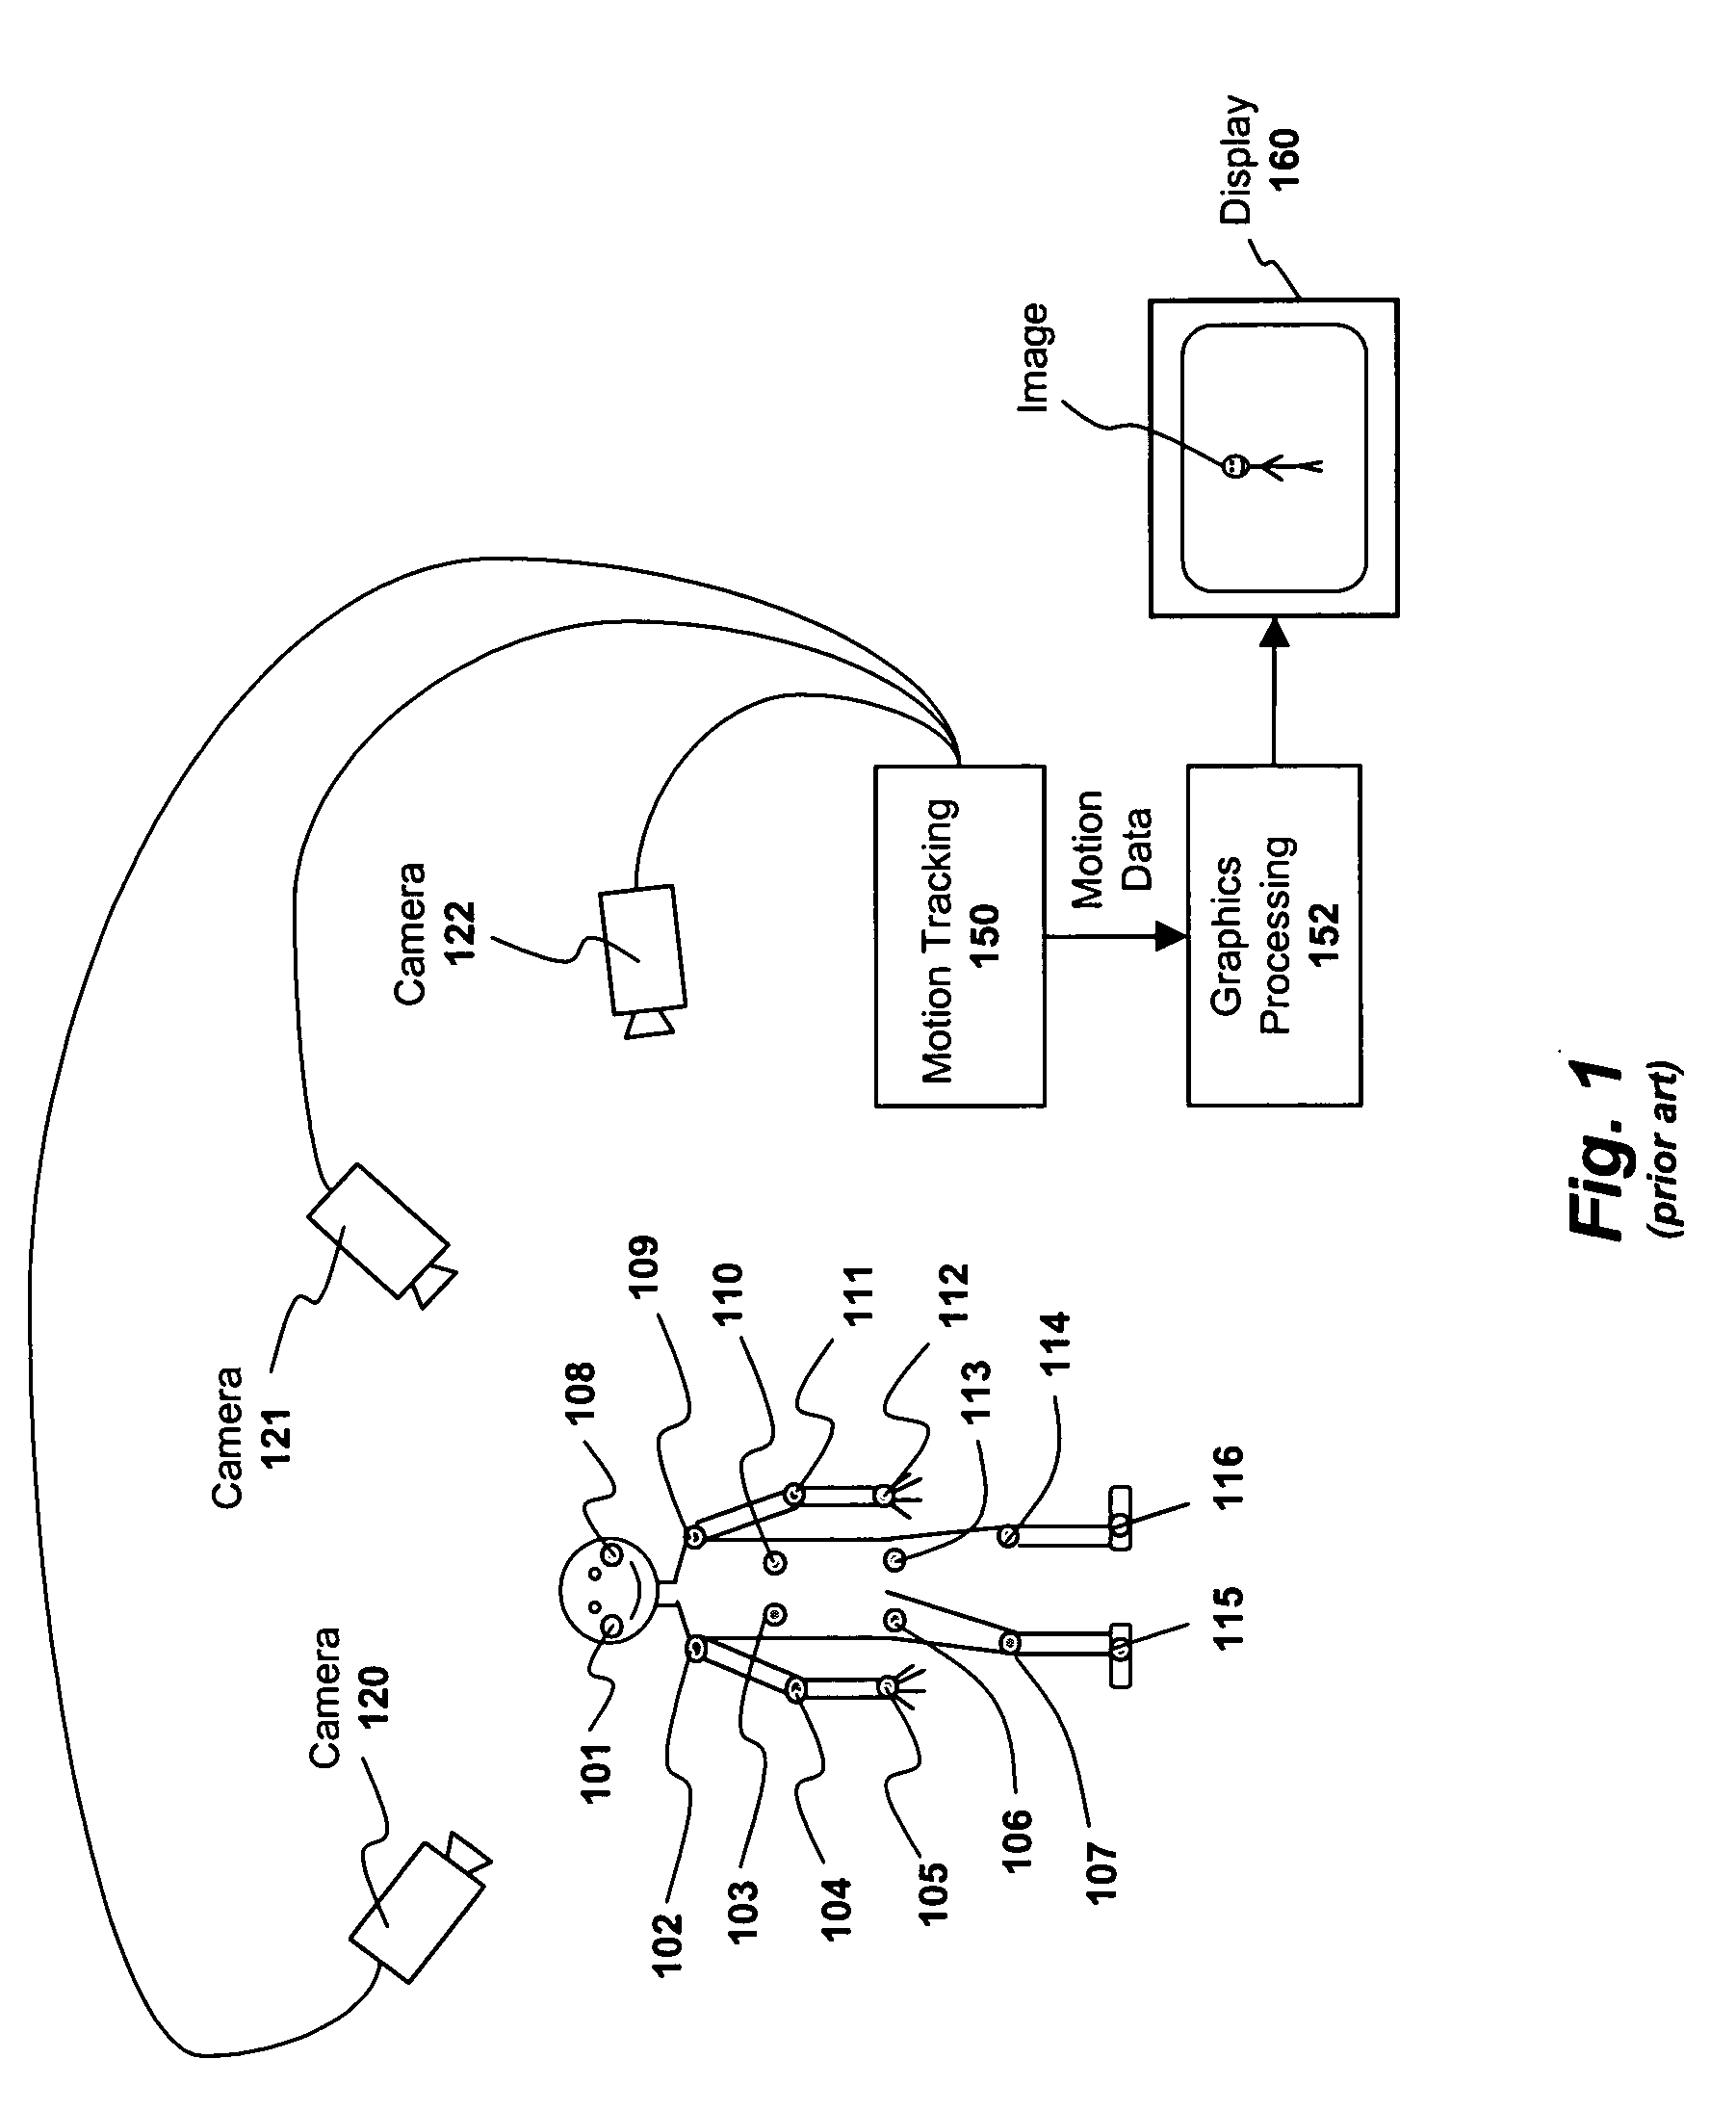 Apparatus and method for capturing the expression of a performer